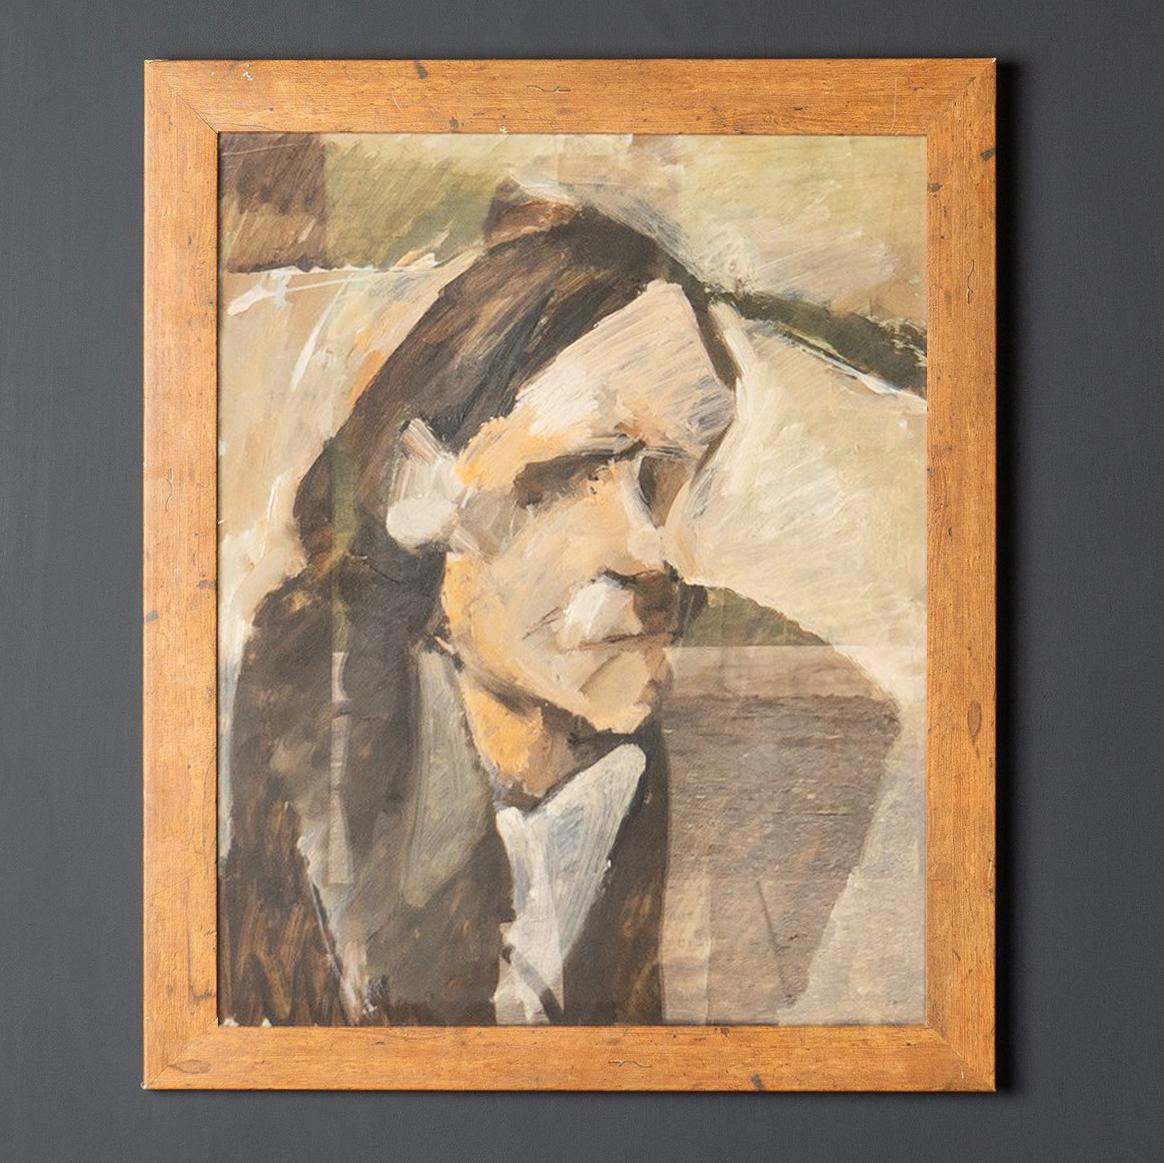 Vintage Original Oil Painting Depicting a Male Sitter

A quick expressive portrait sketch in oils on paper.

Depicting a male sitter with a heavy brow in shades of brown.

Framed and glazed in a wooden frame with an applied faux woodgrain.

The